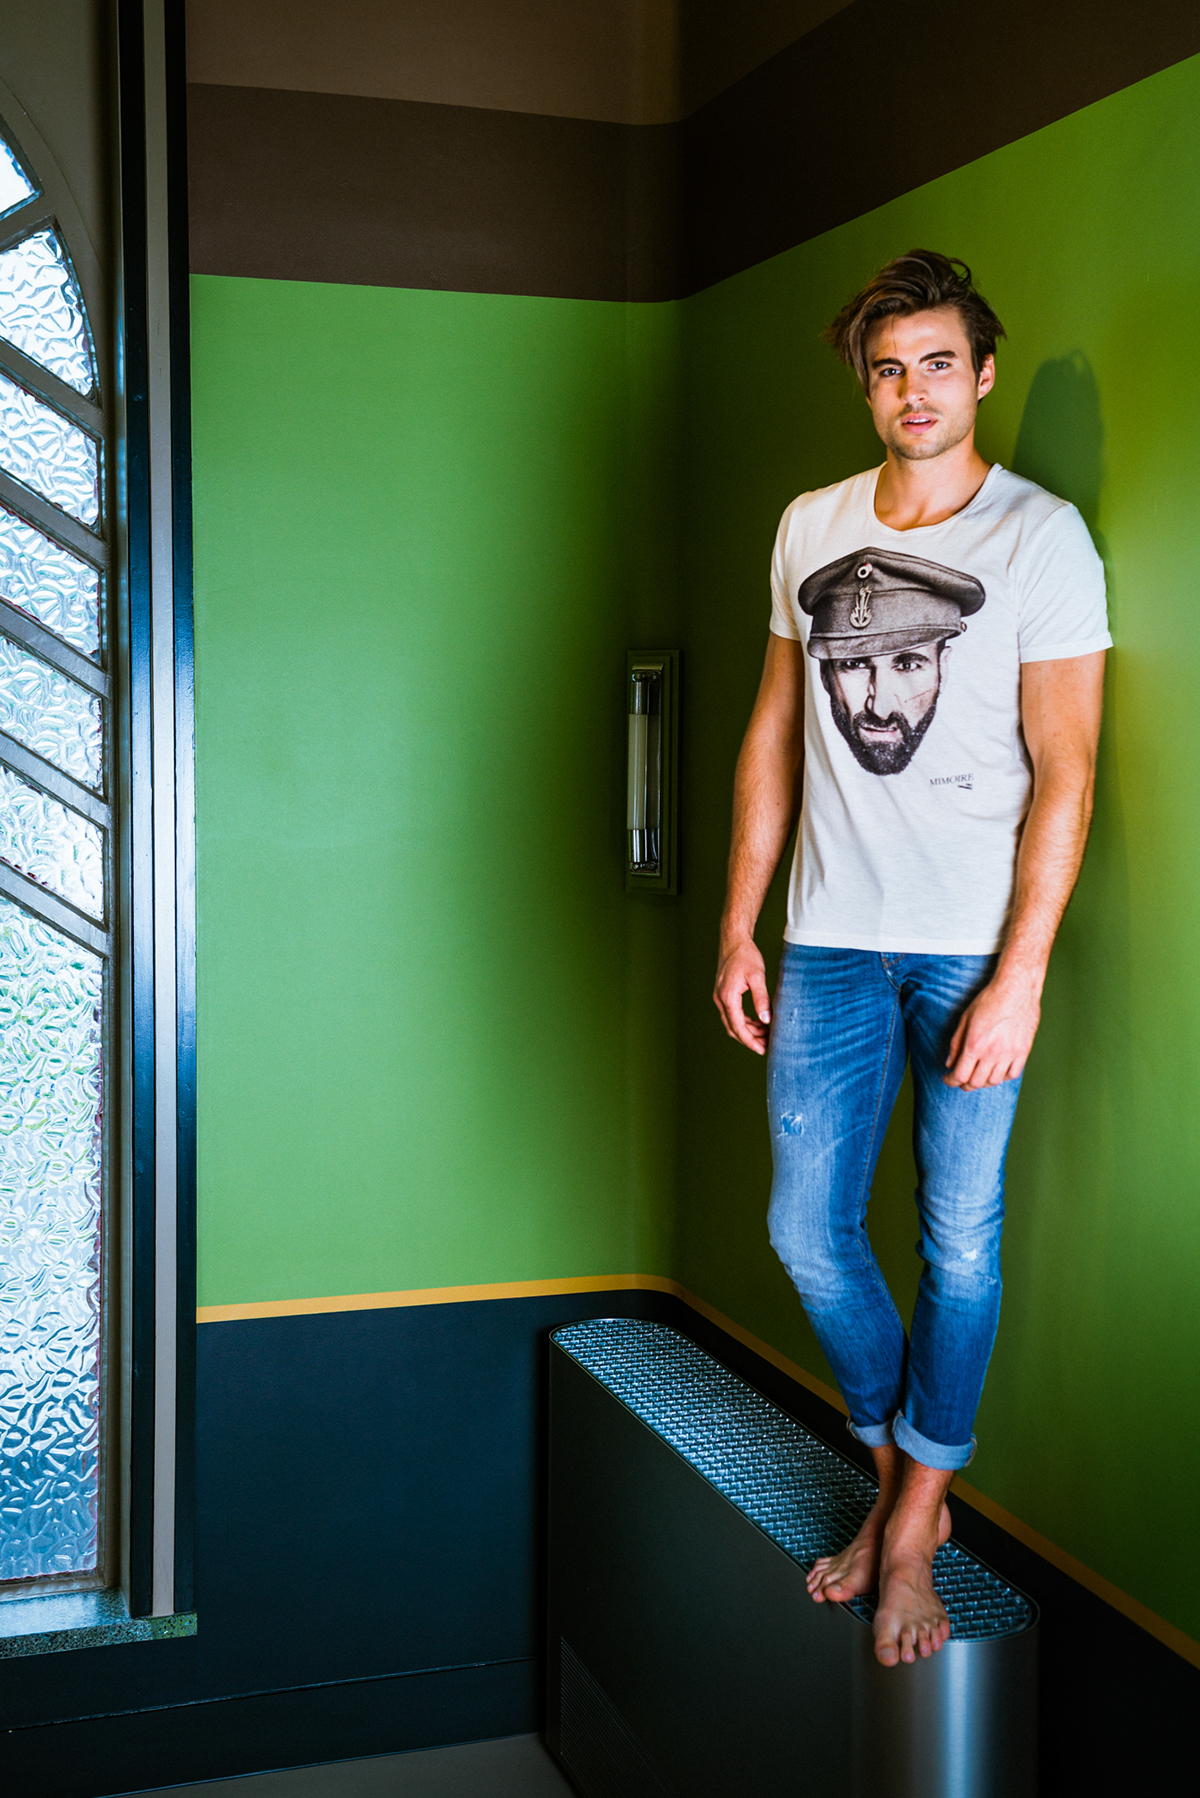 belgium Eperon d'Or fasion Photography  Roeselare studio mimoire tshirt